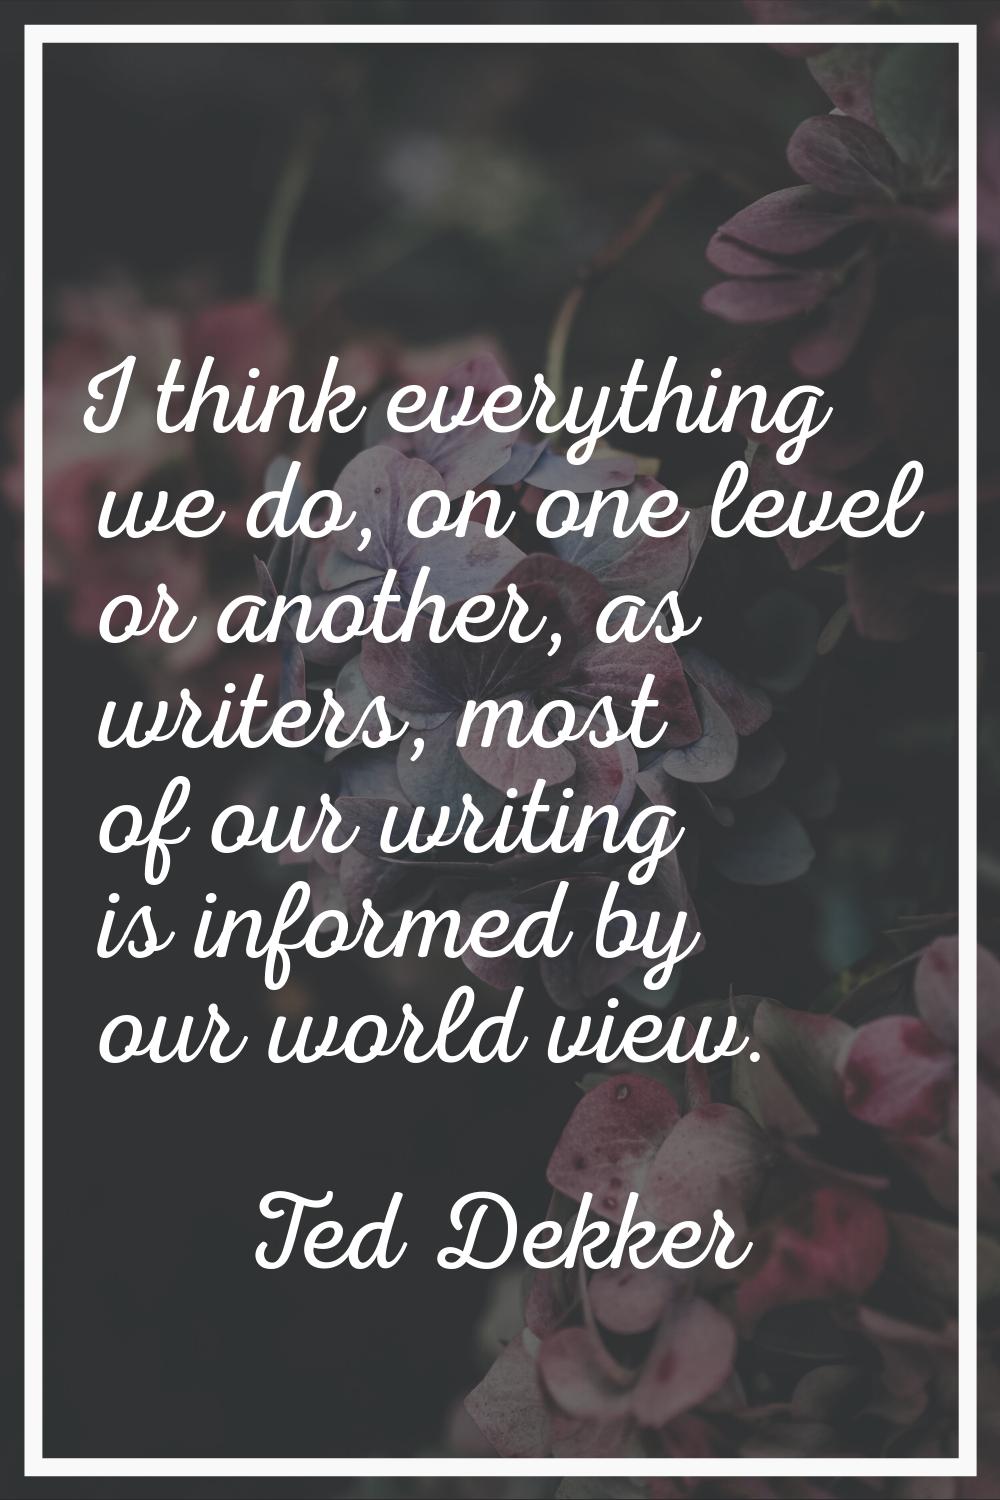 I think everything we do, on one level or another, as writers, most of our writing is informed by o